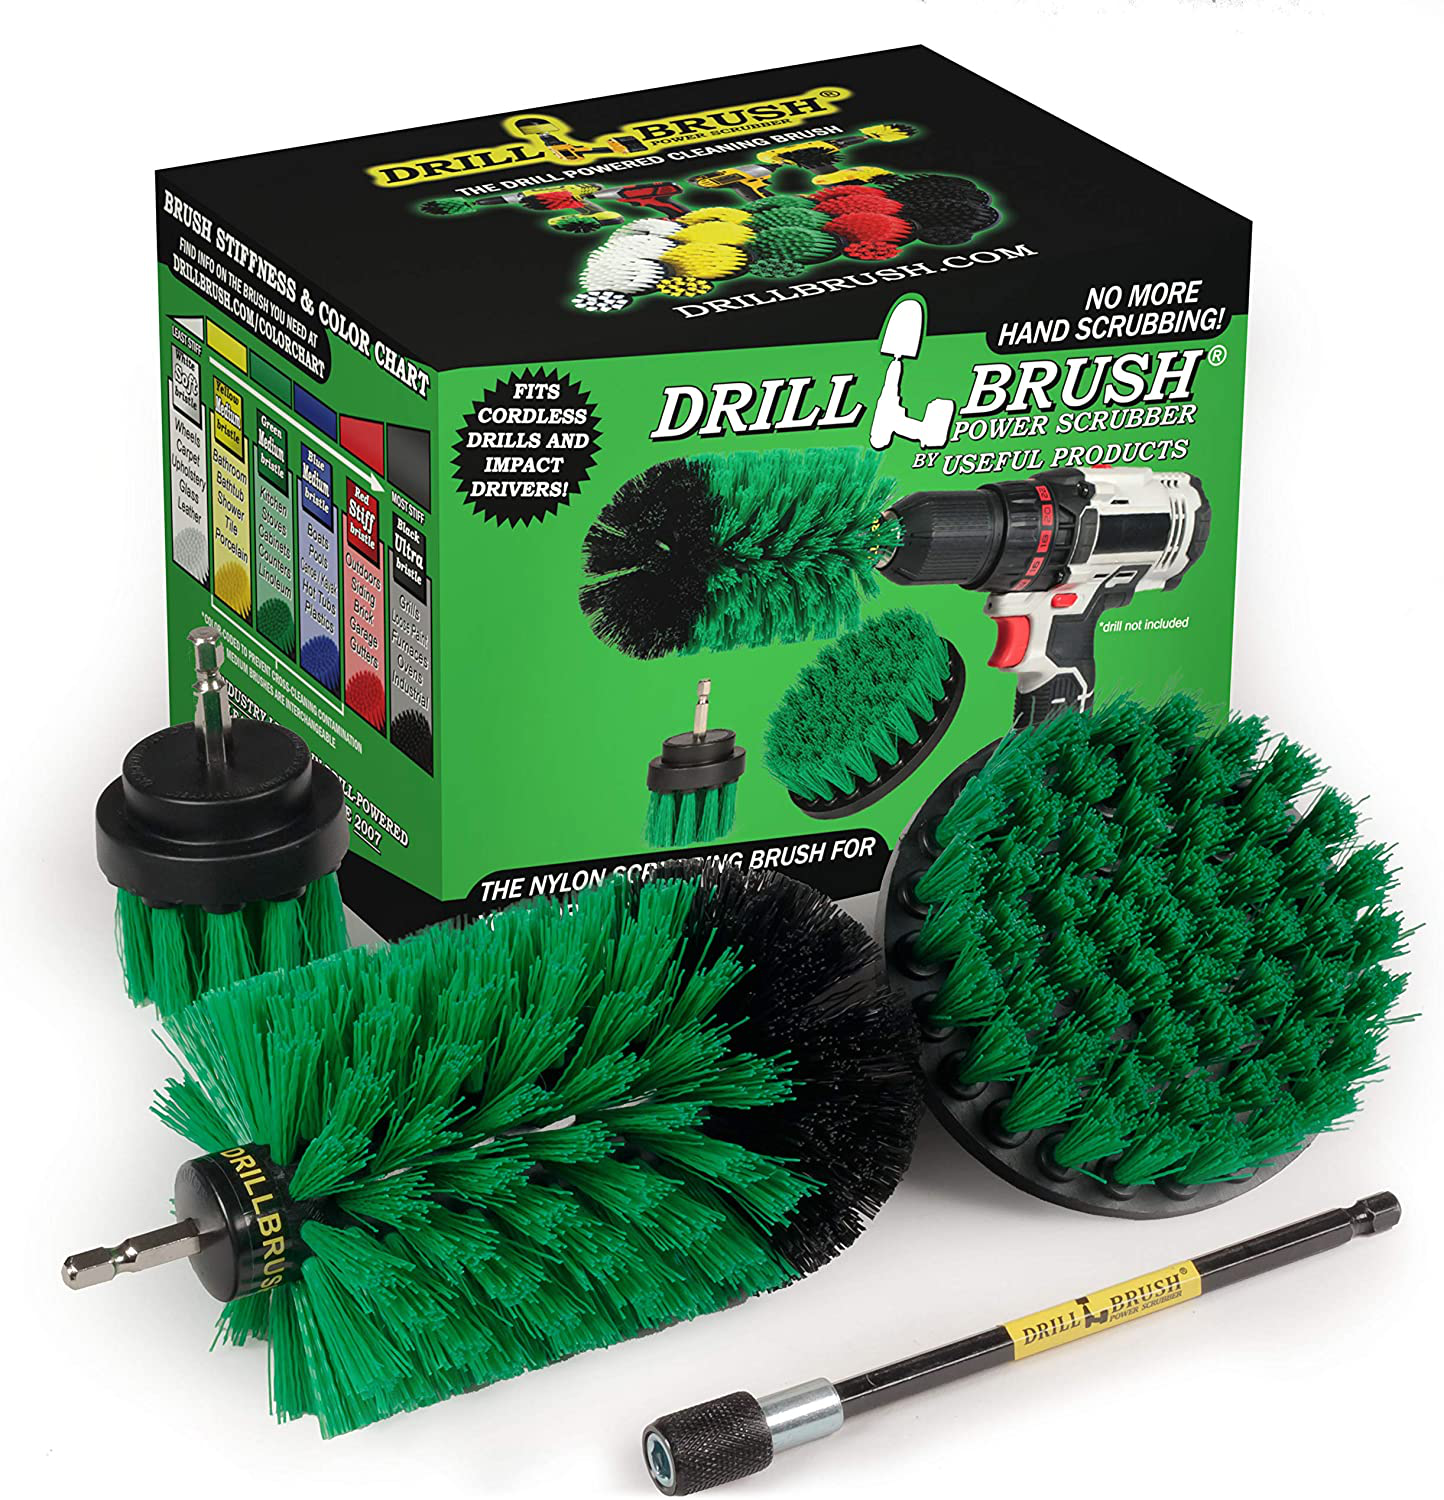 Drill Brush Power Scrubber by Useful Products – Drillbrush Medium